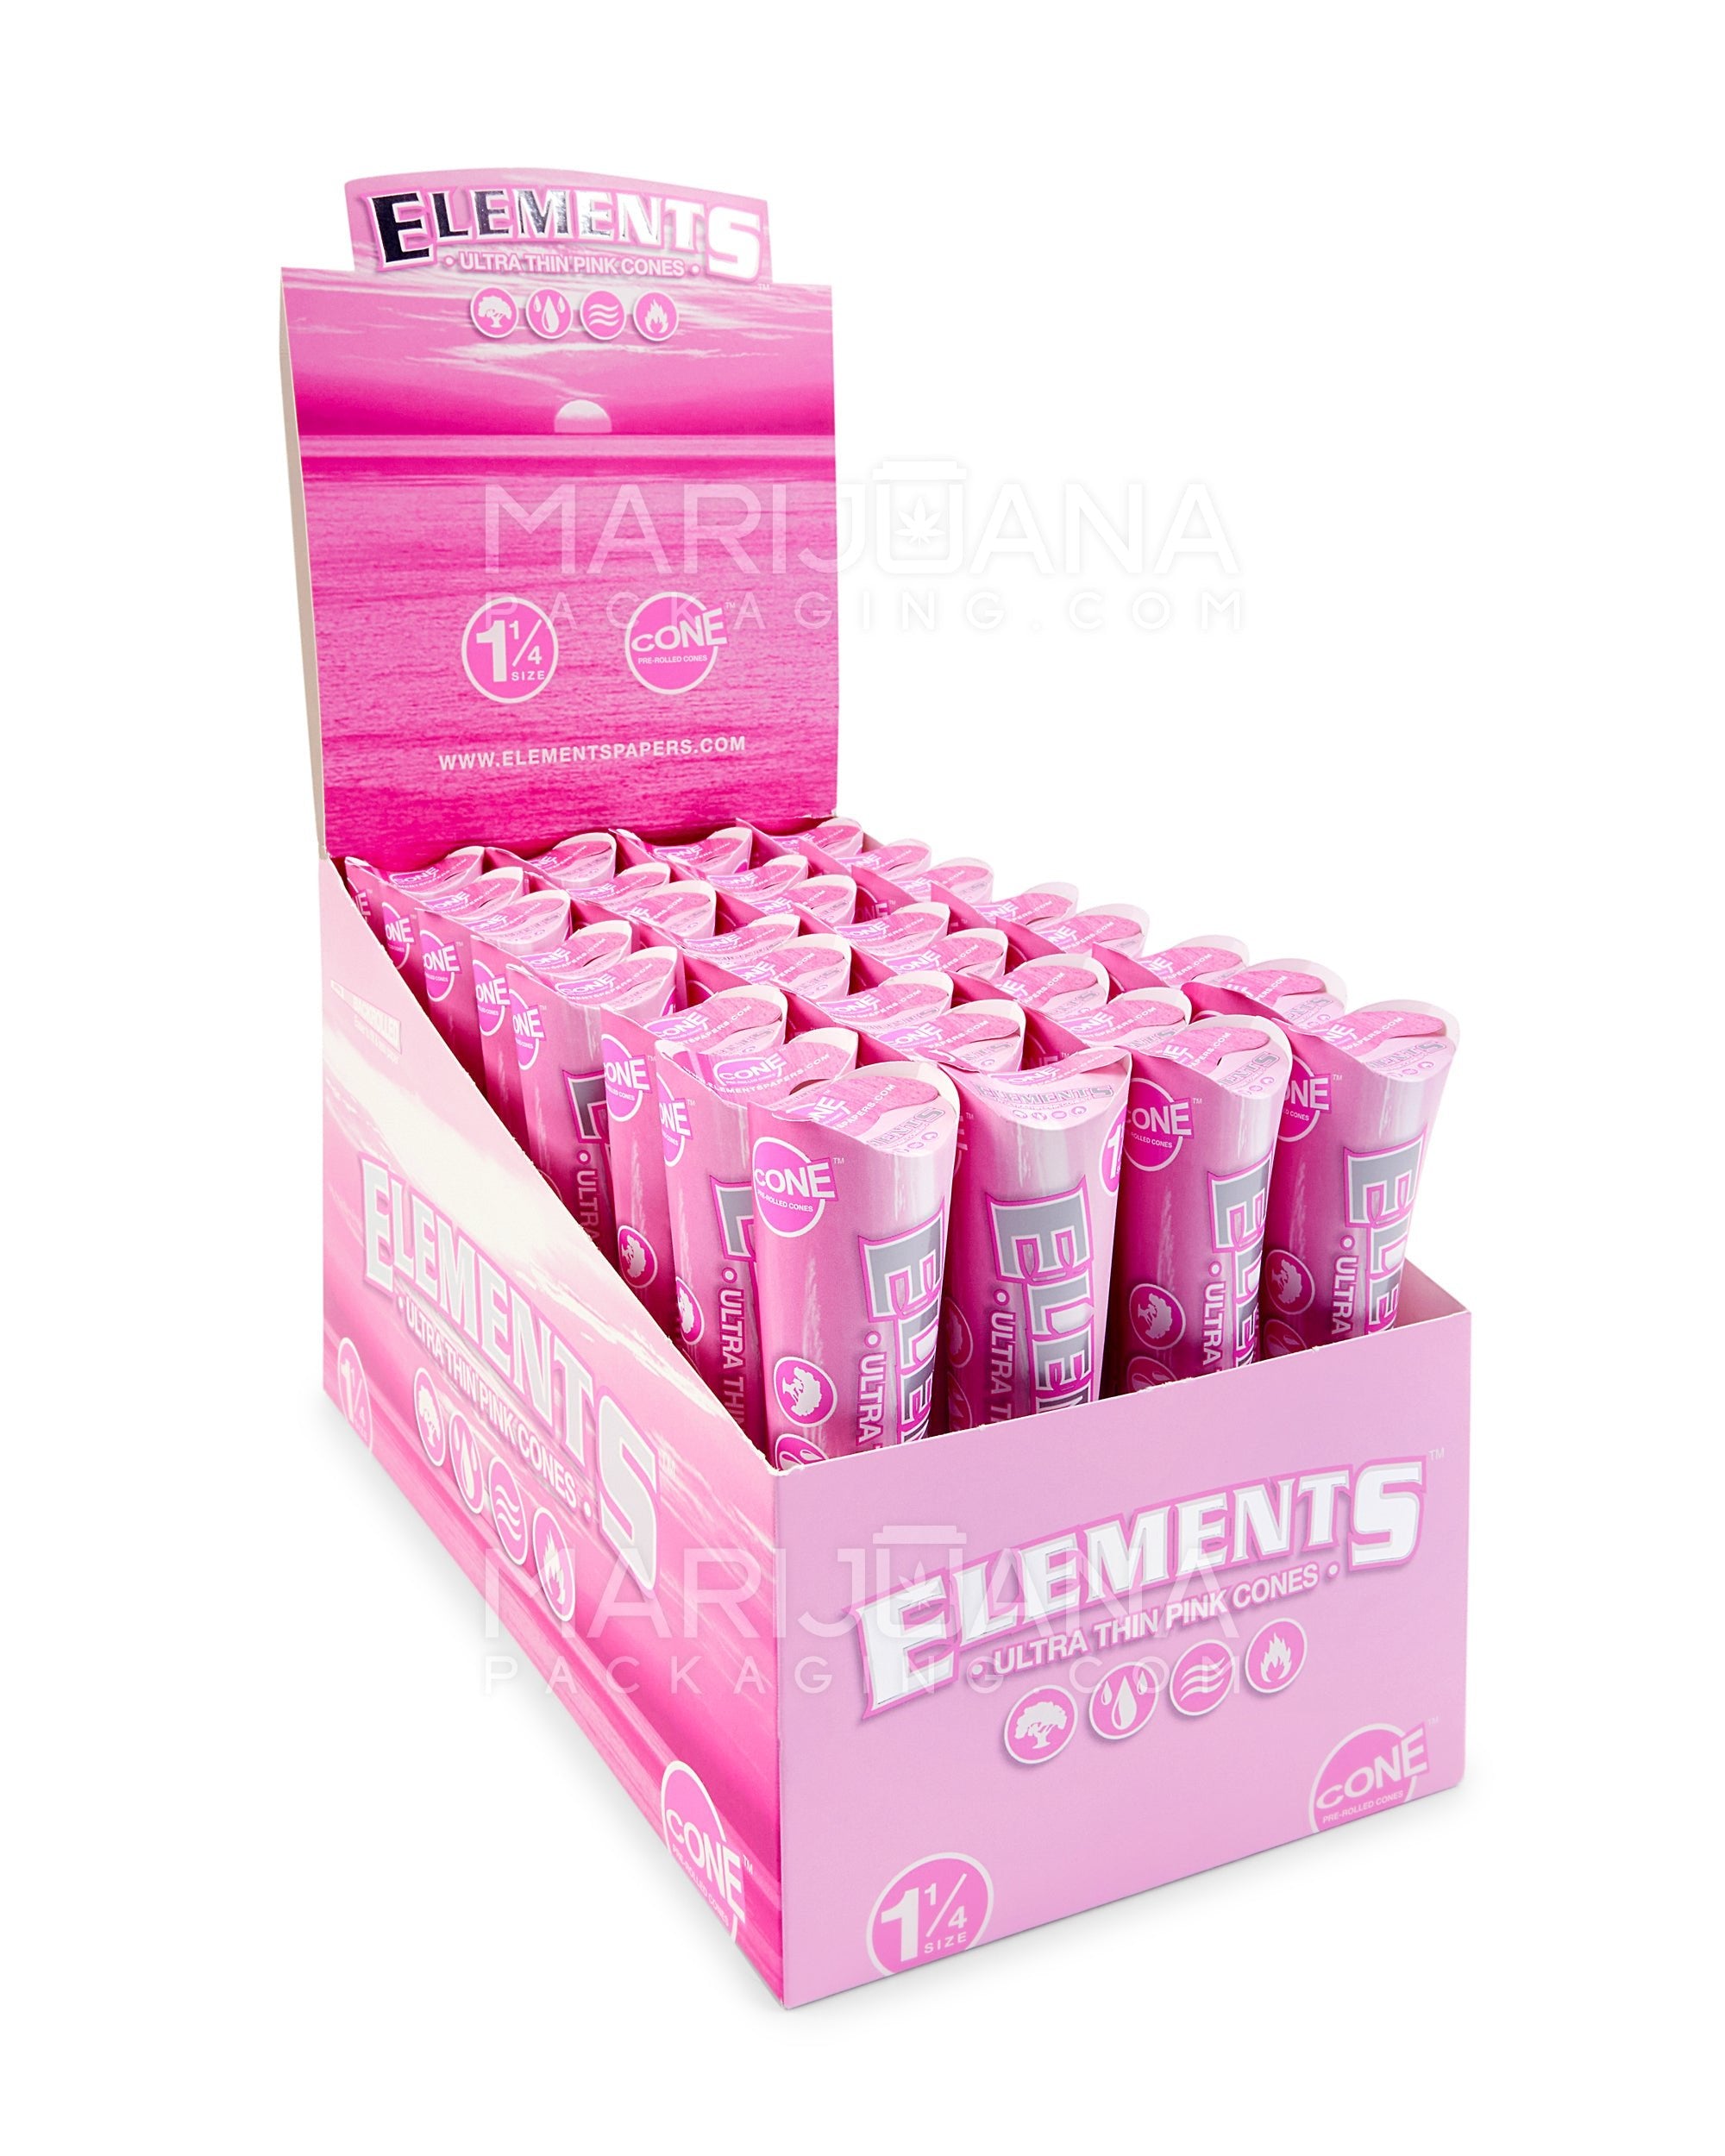 Pink Pre Rolled Cones, 1-1/4, 50 Count